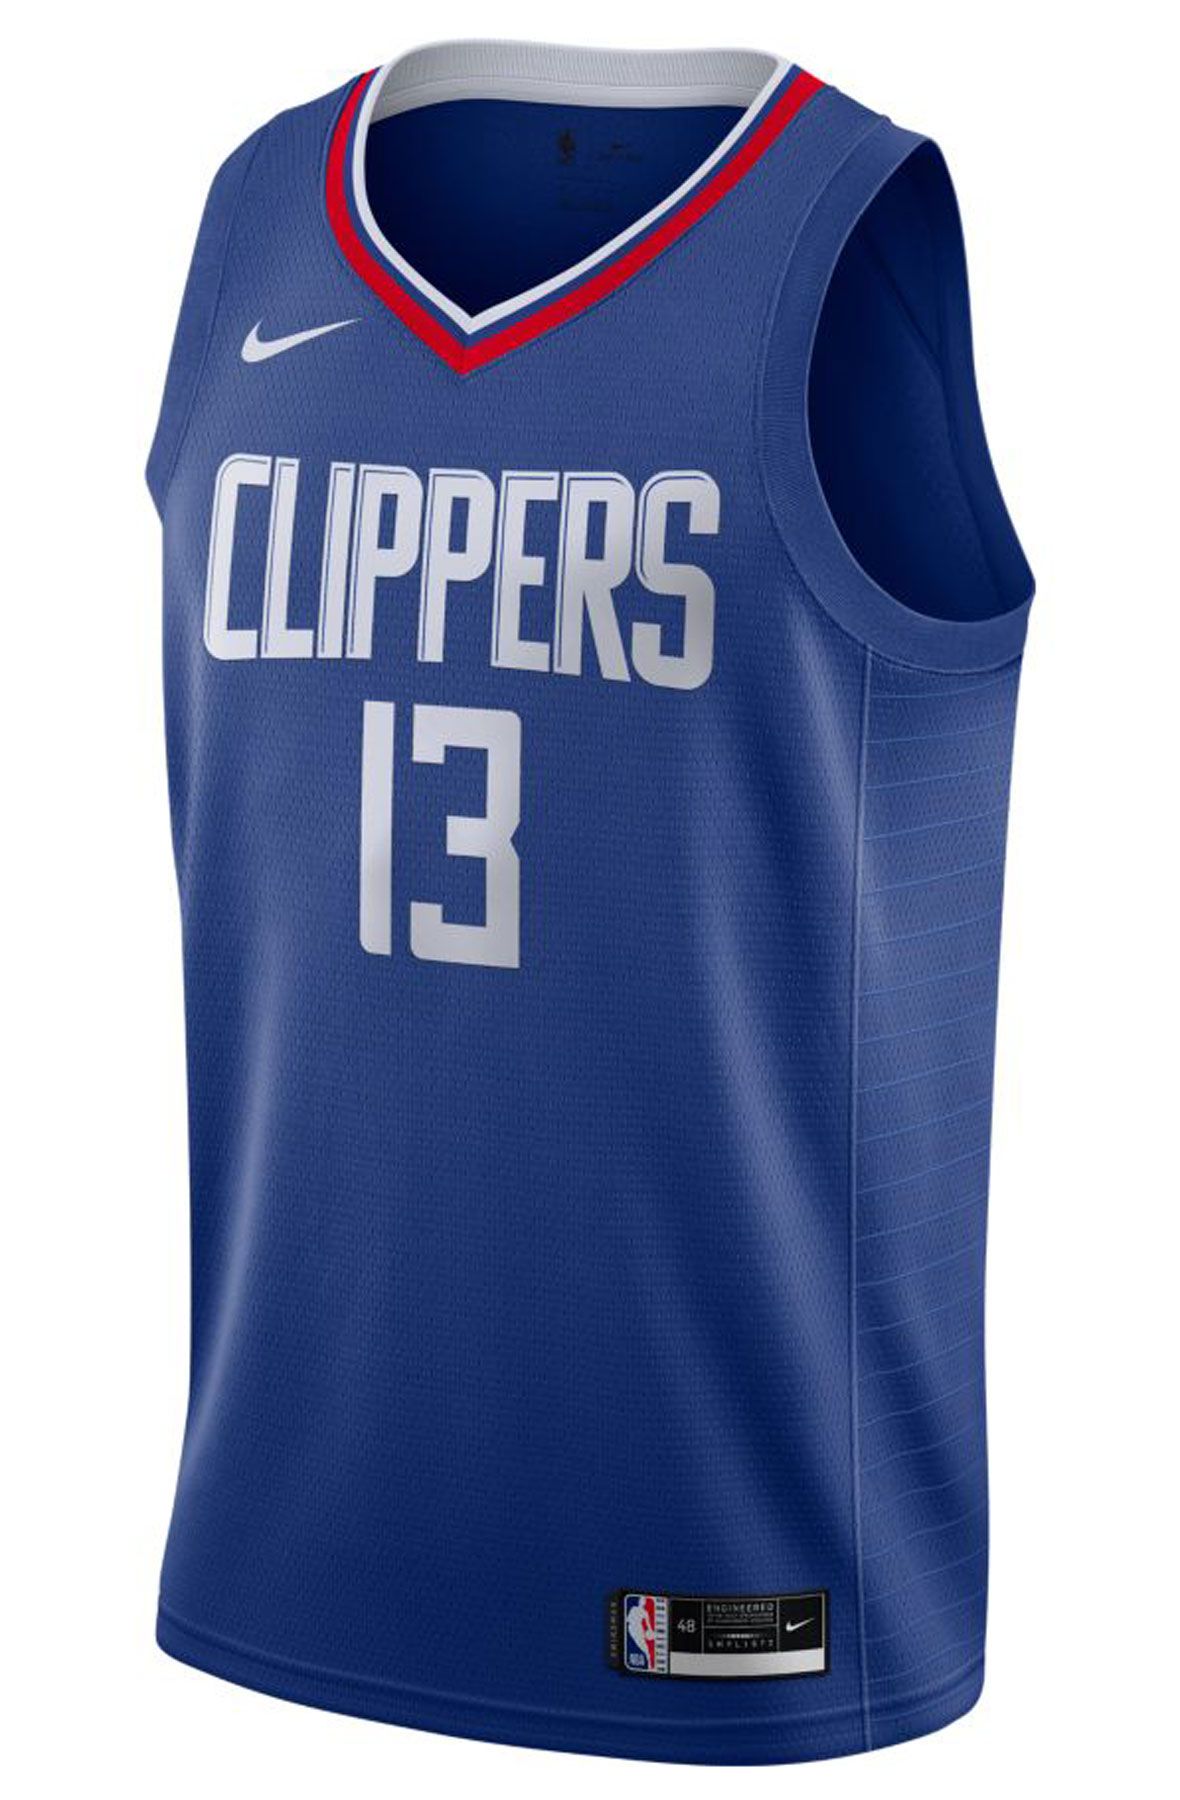 Nike Dri-FIT NBA Los Angeles Clippers Paul George Icon Edition